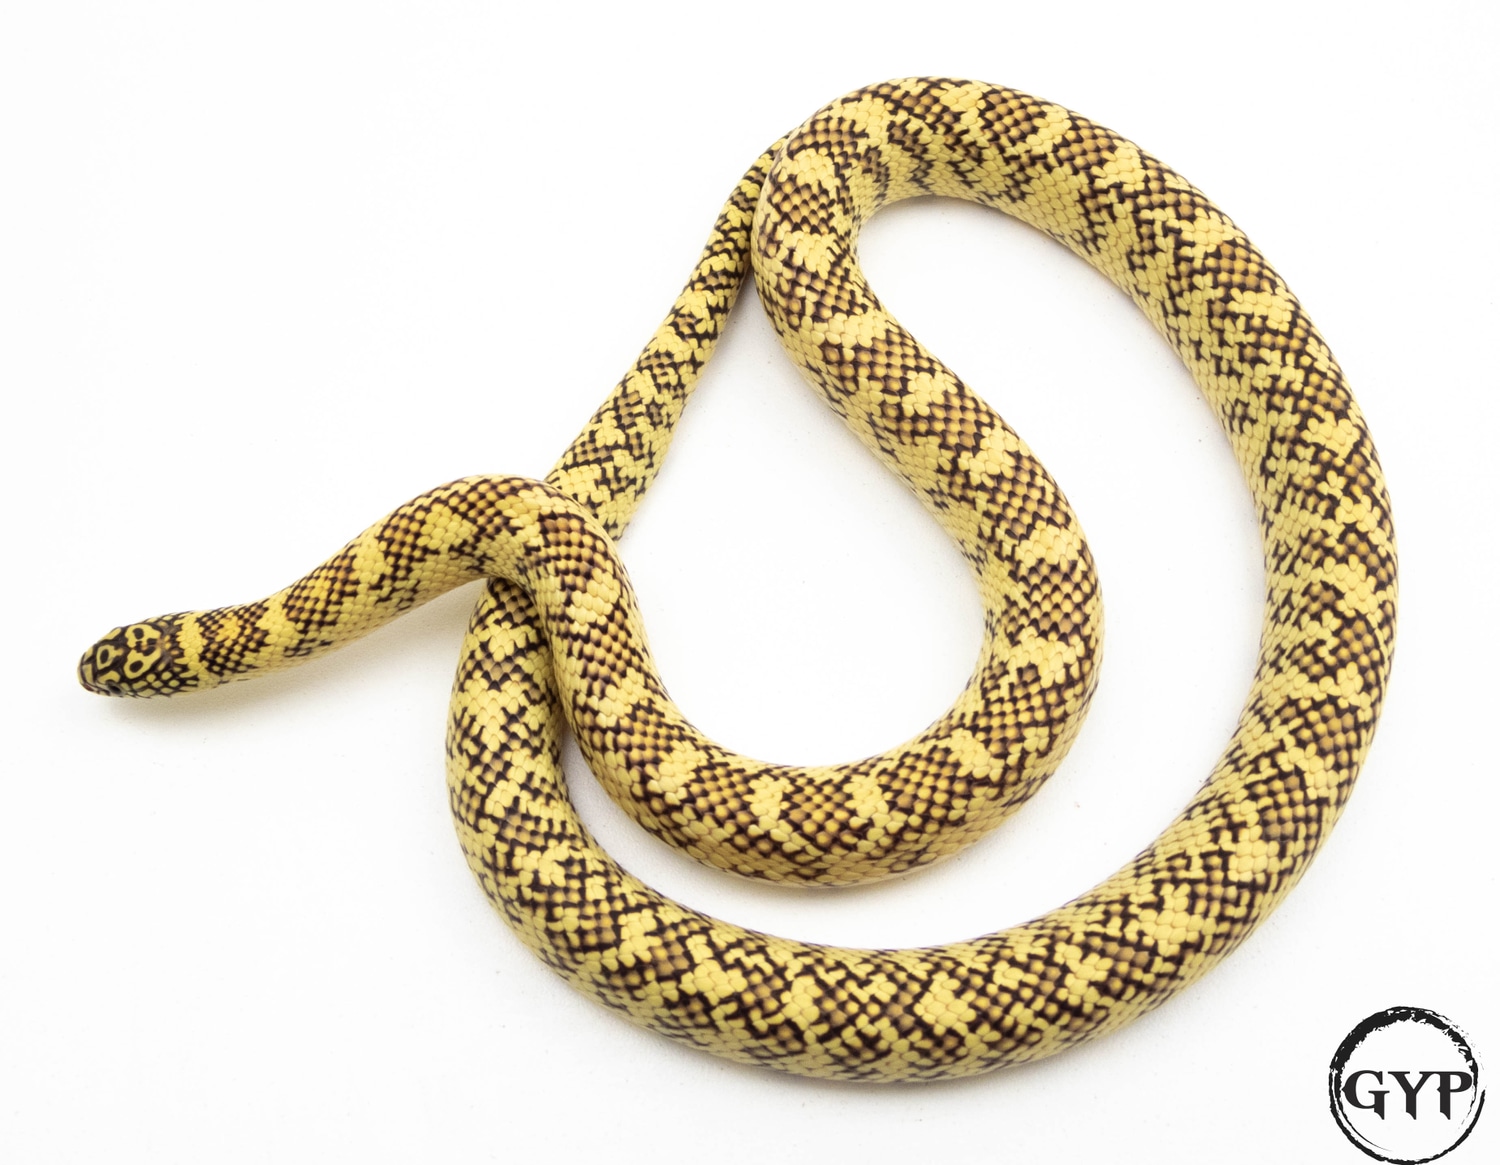 HyperXanthic Florida Kingsnake by Gopher Your Pet